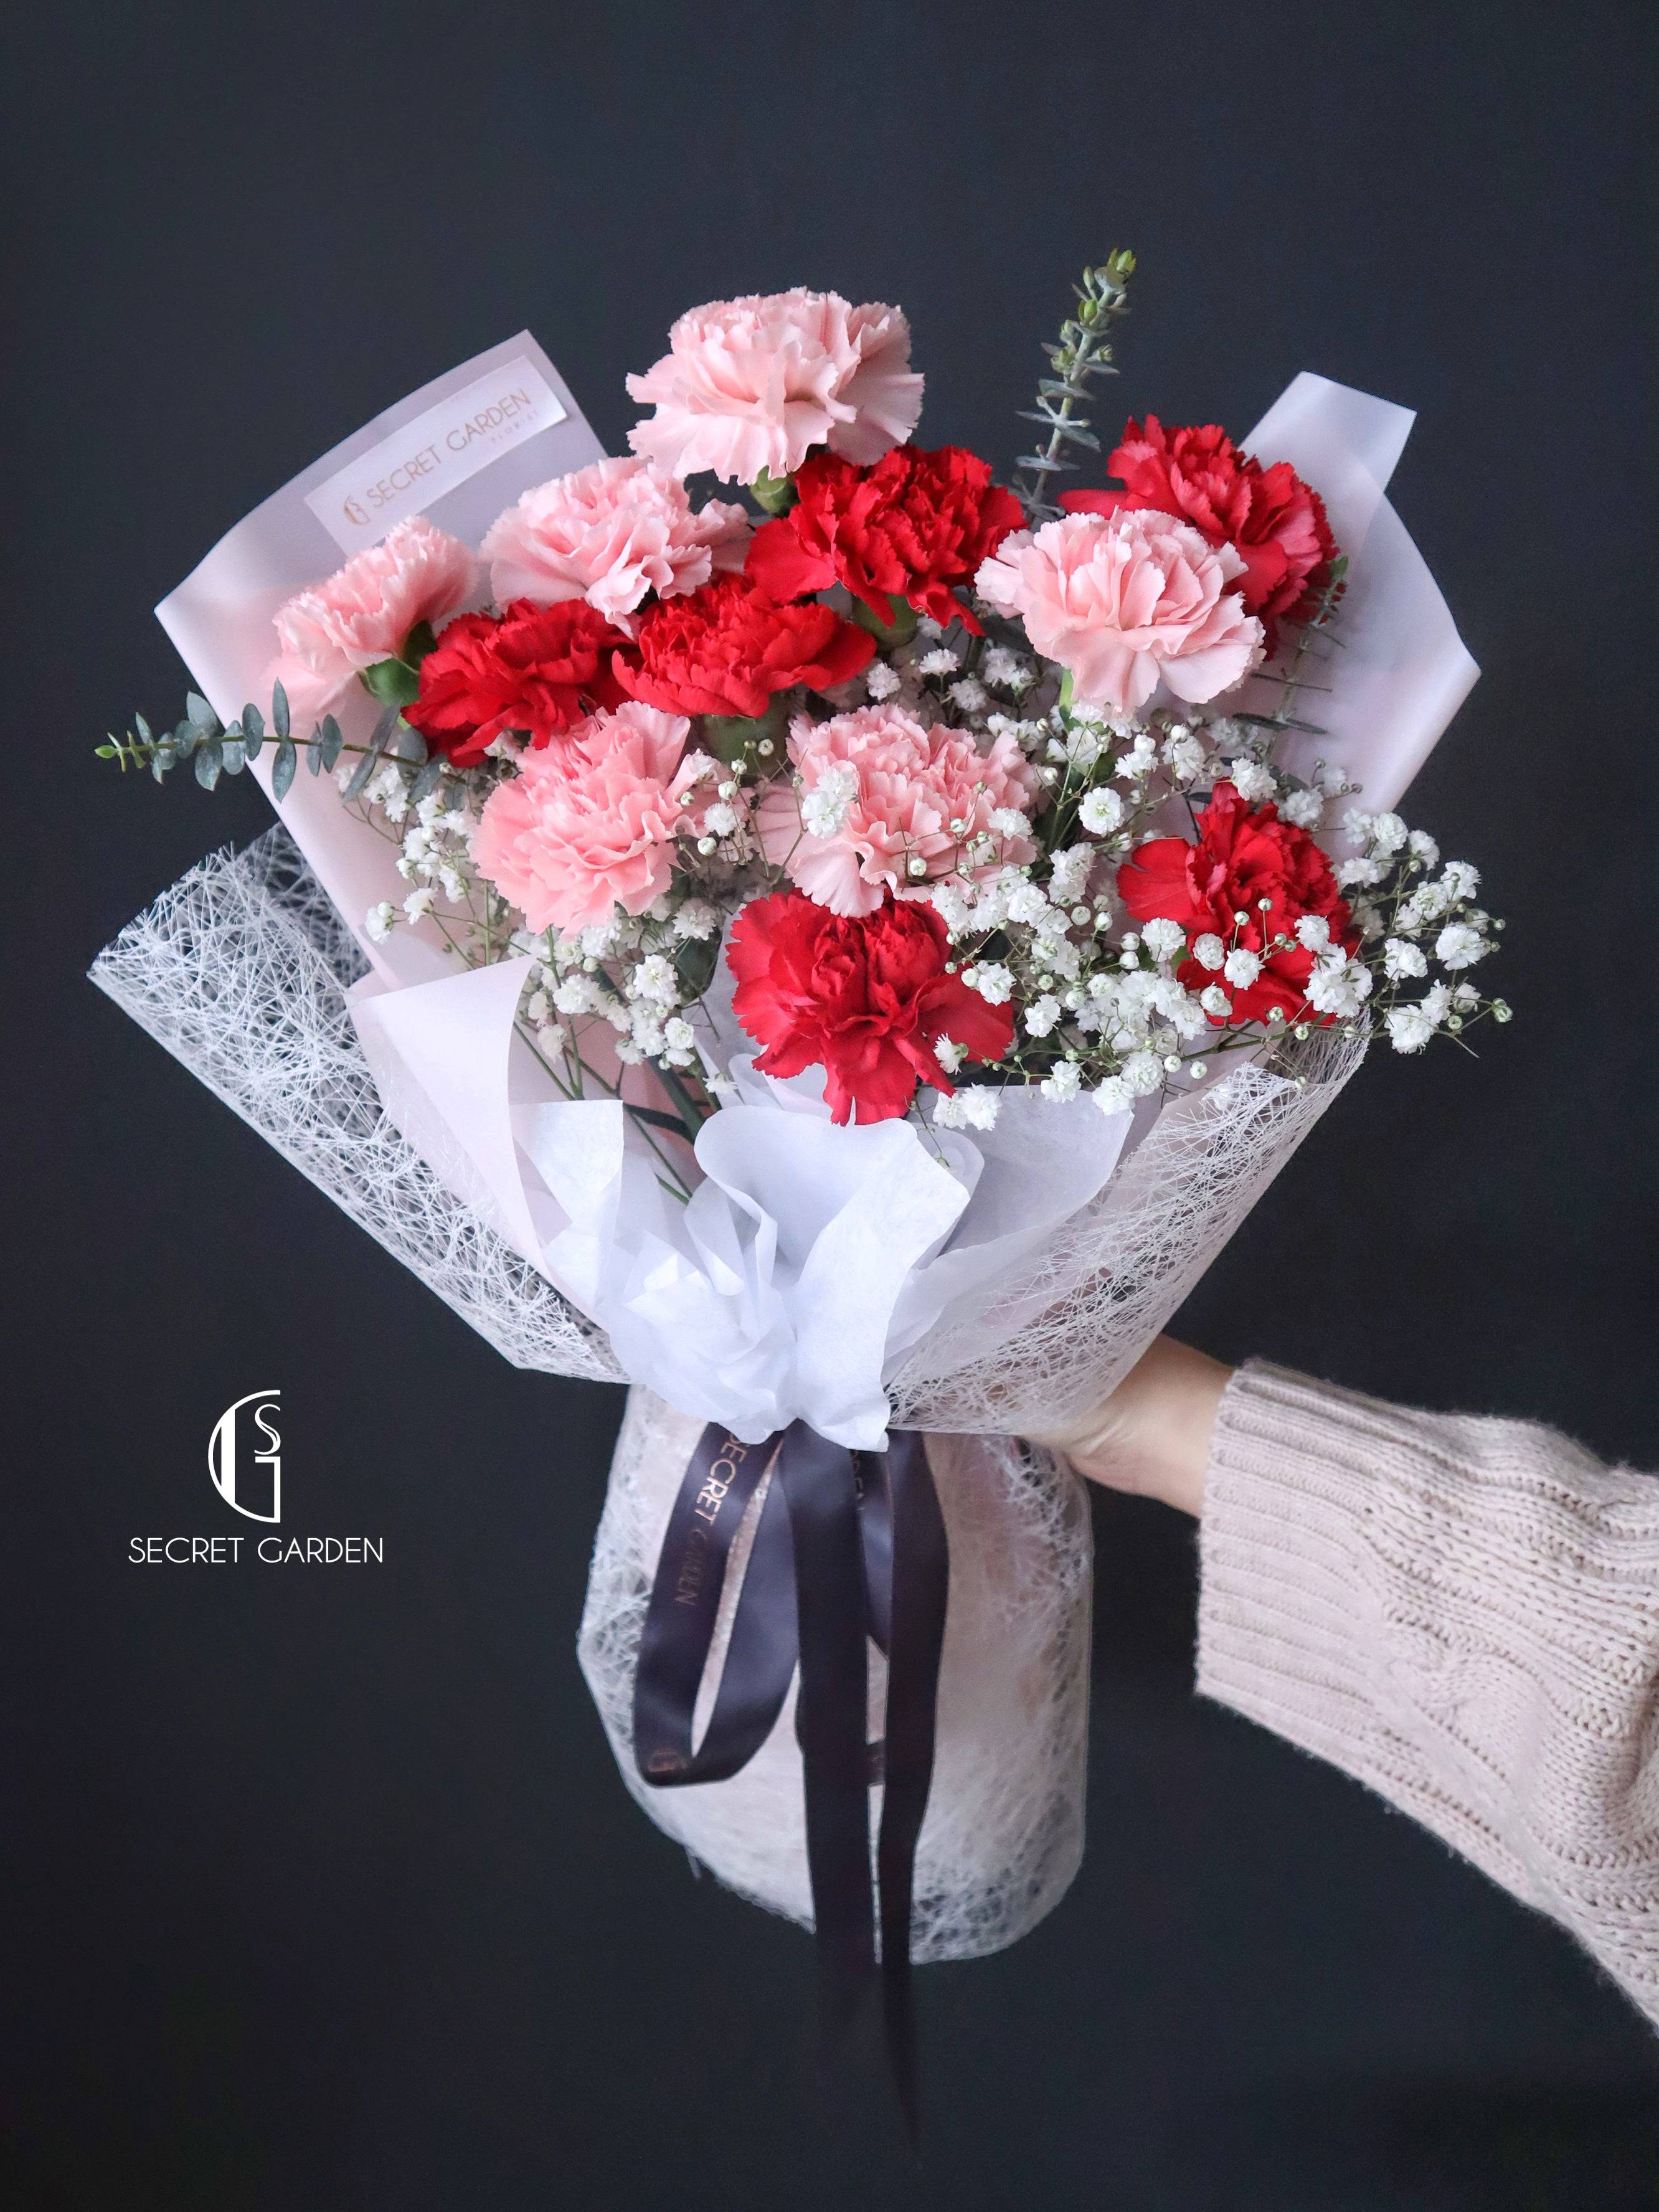 Secret Garden Sala Floral - Local Florist, Flower Delivery - Burnaby,  Vancouver and Lower Mainland